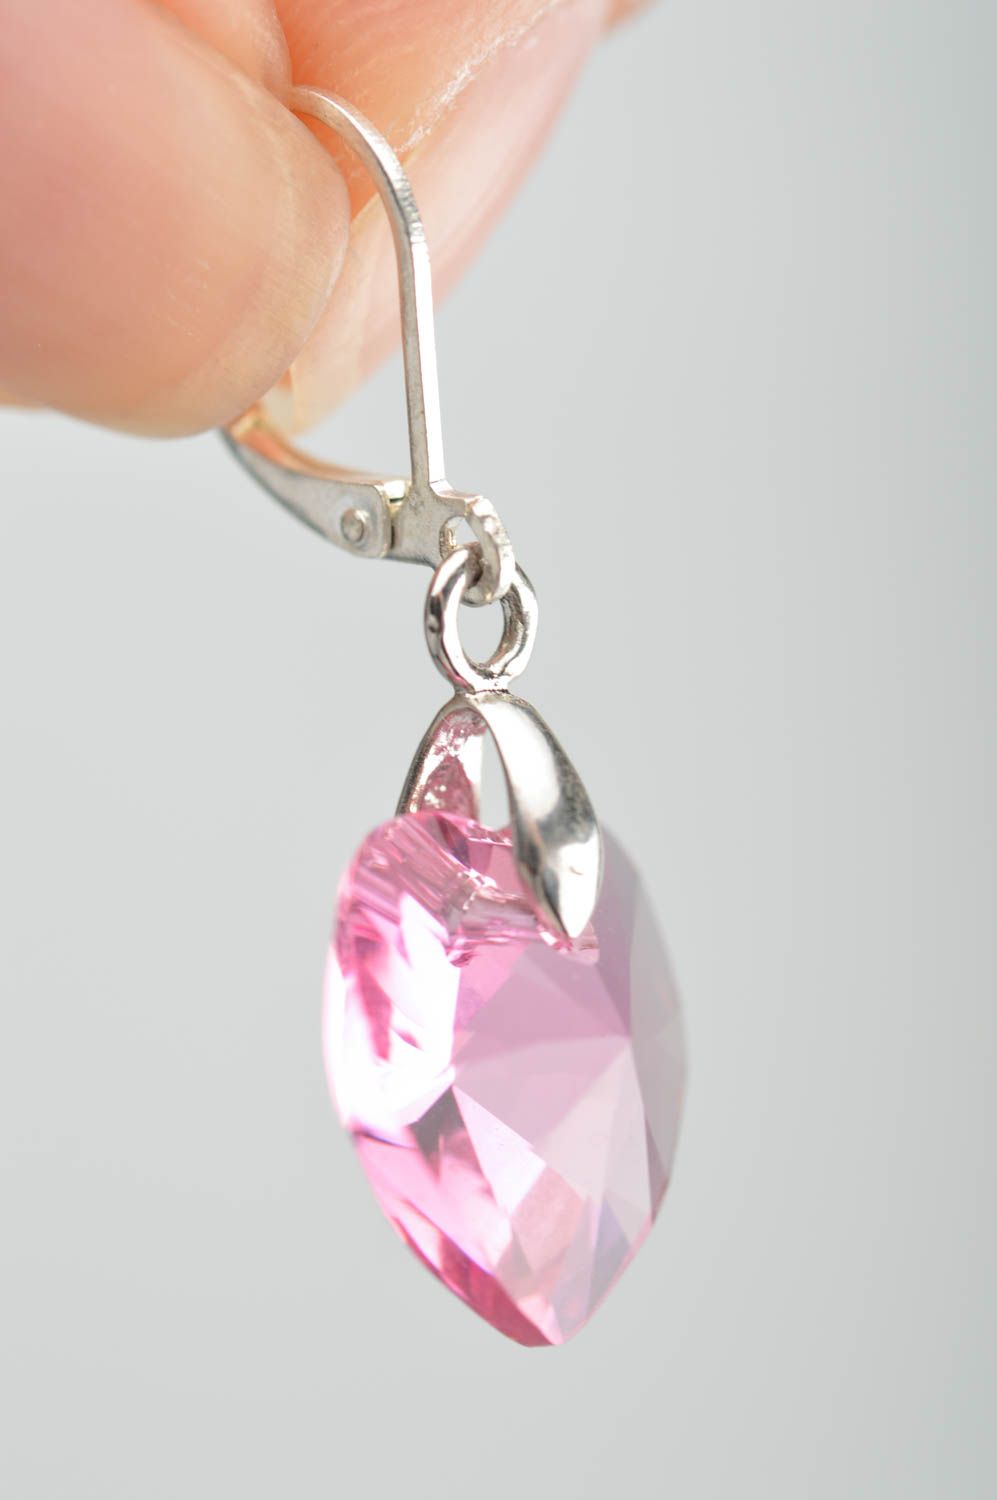 Handmade accessories earrings with crystals pink jewelry best gift ideas photo 3